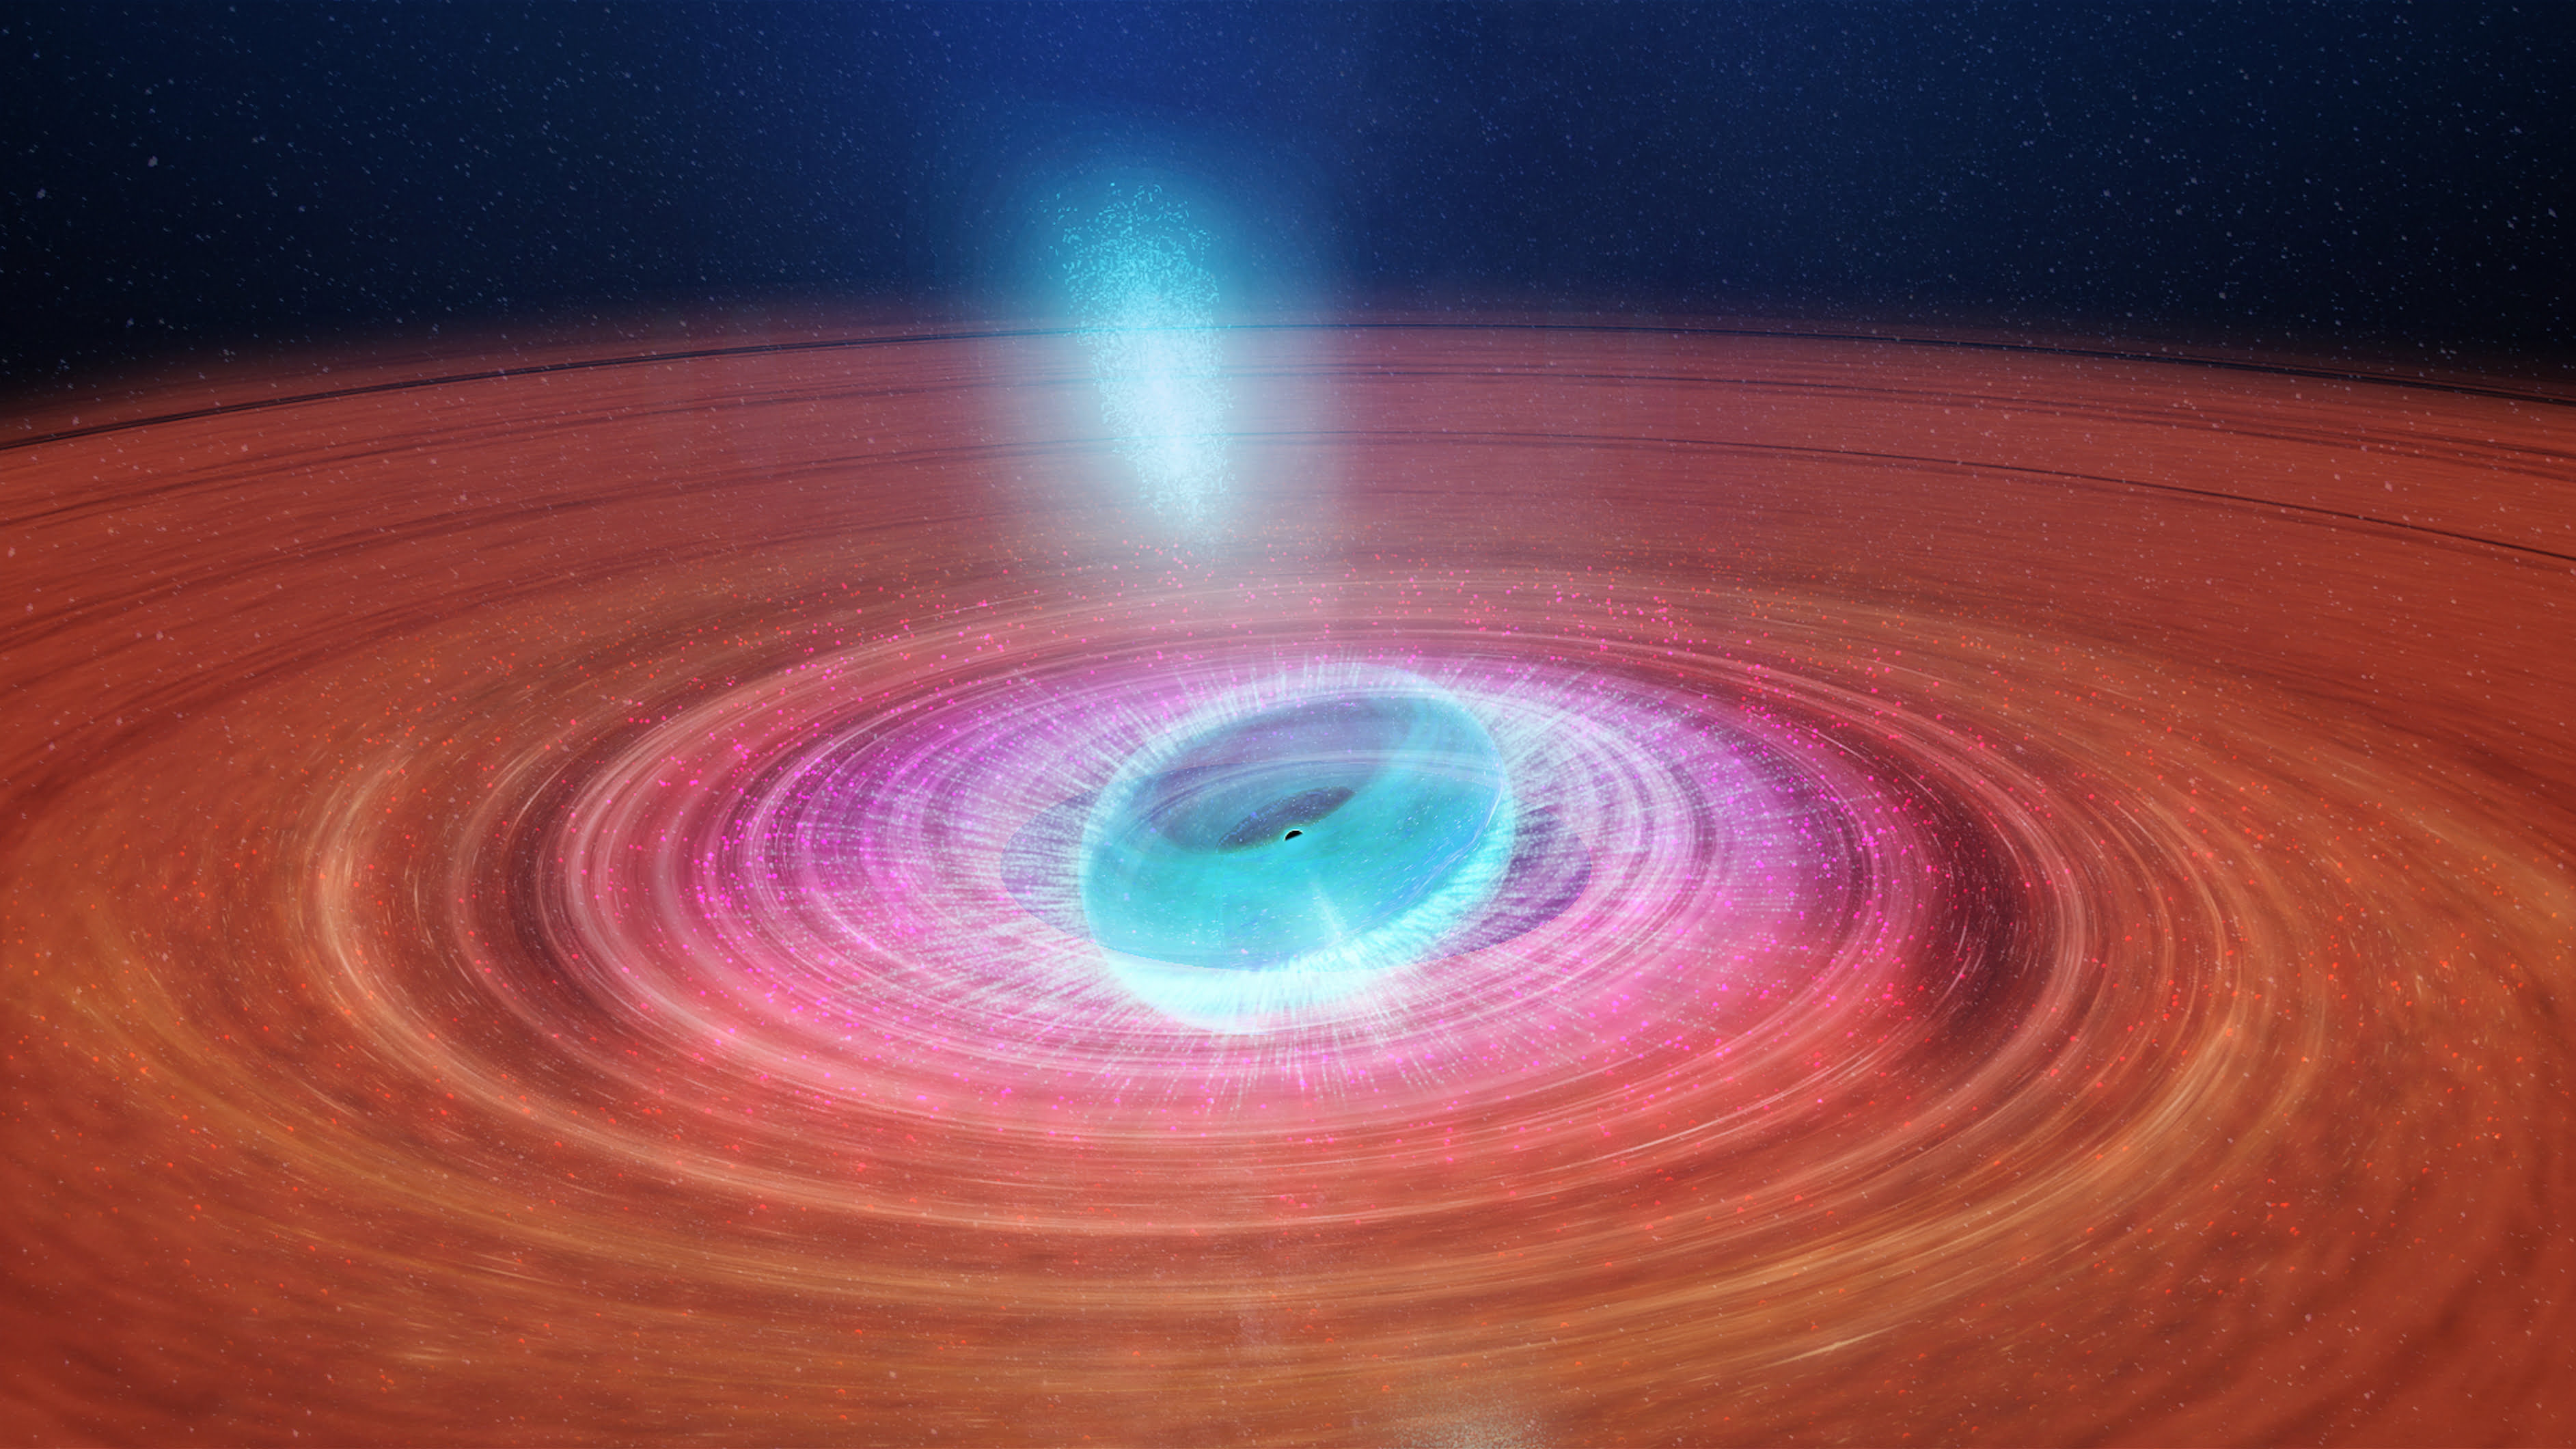 Artist’s impression of jet ejections in V404 Cygni. With our radio telescopes, we see individual bright clouds of plasma that have been ejected from the innermost regions, and redirected by the puffed-up inner accretion disk. Credit: ICRAR